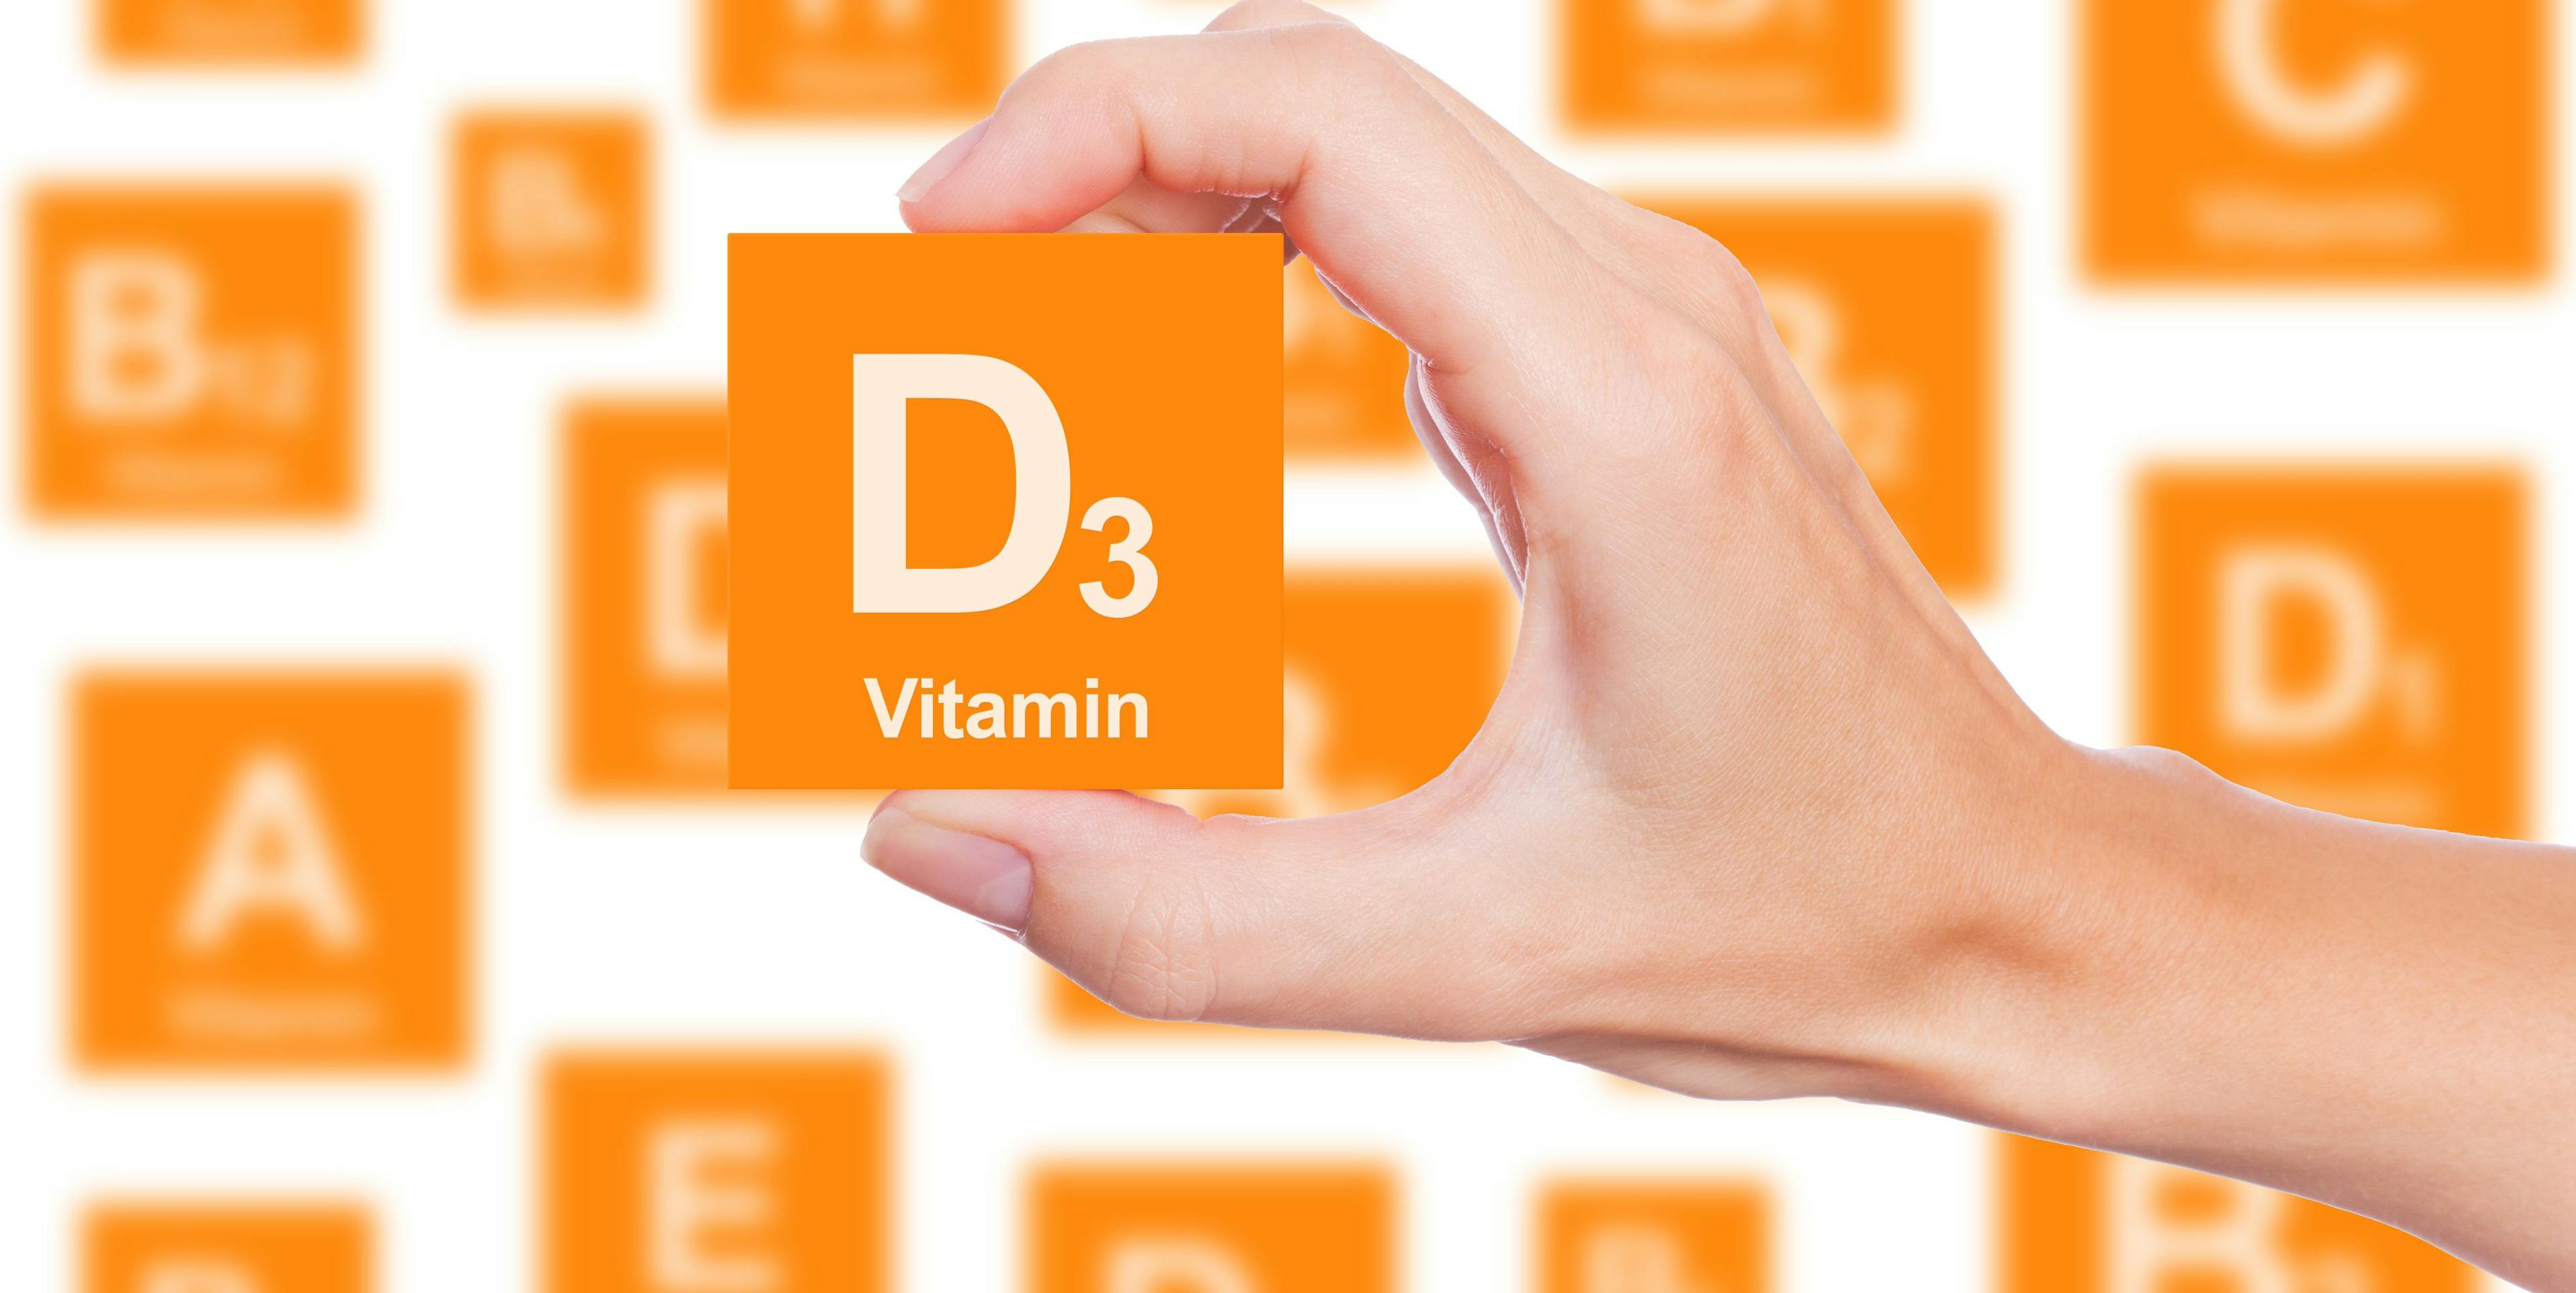 5 Patient Populations That Need More Vitamin D